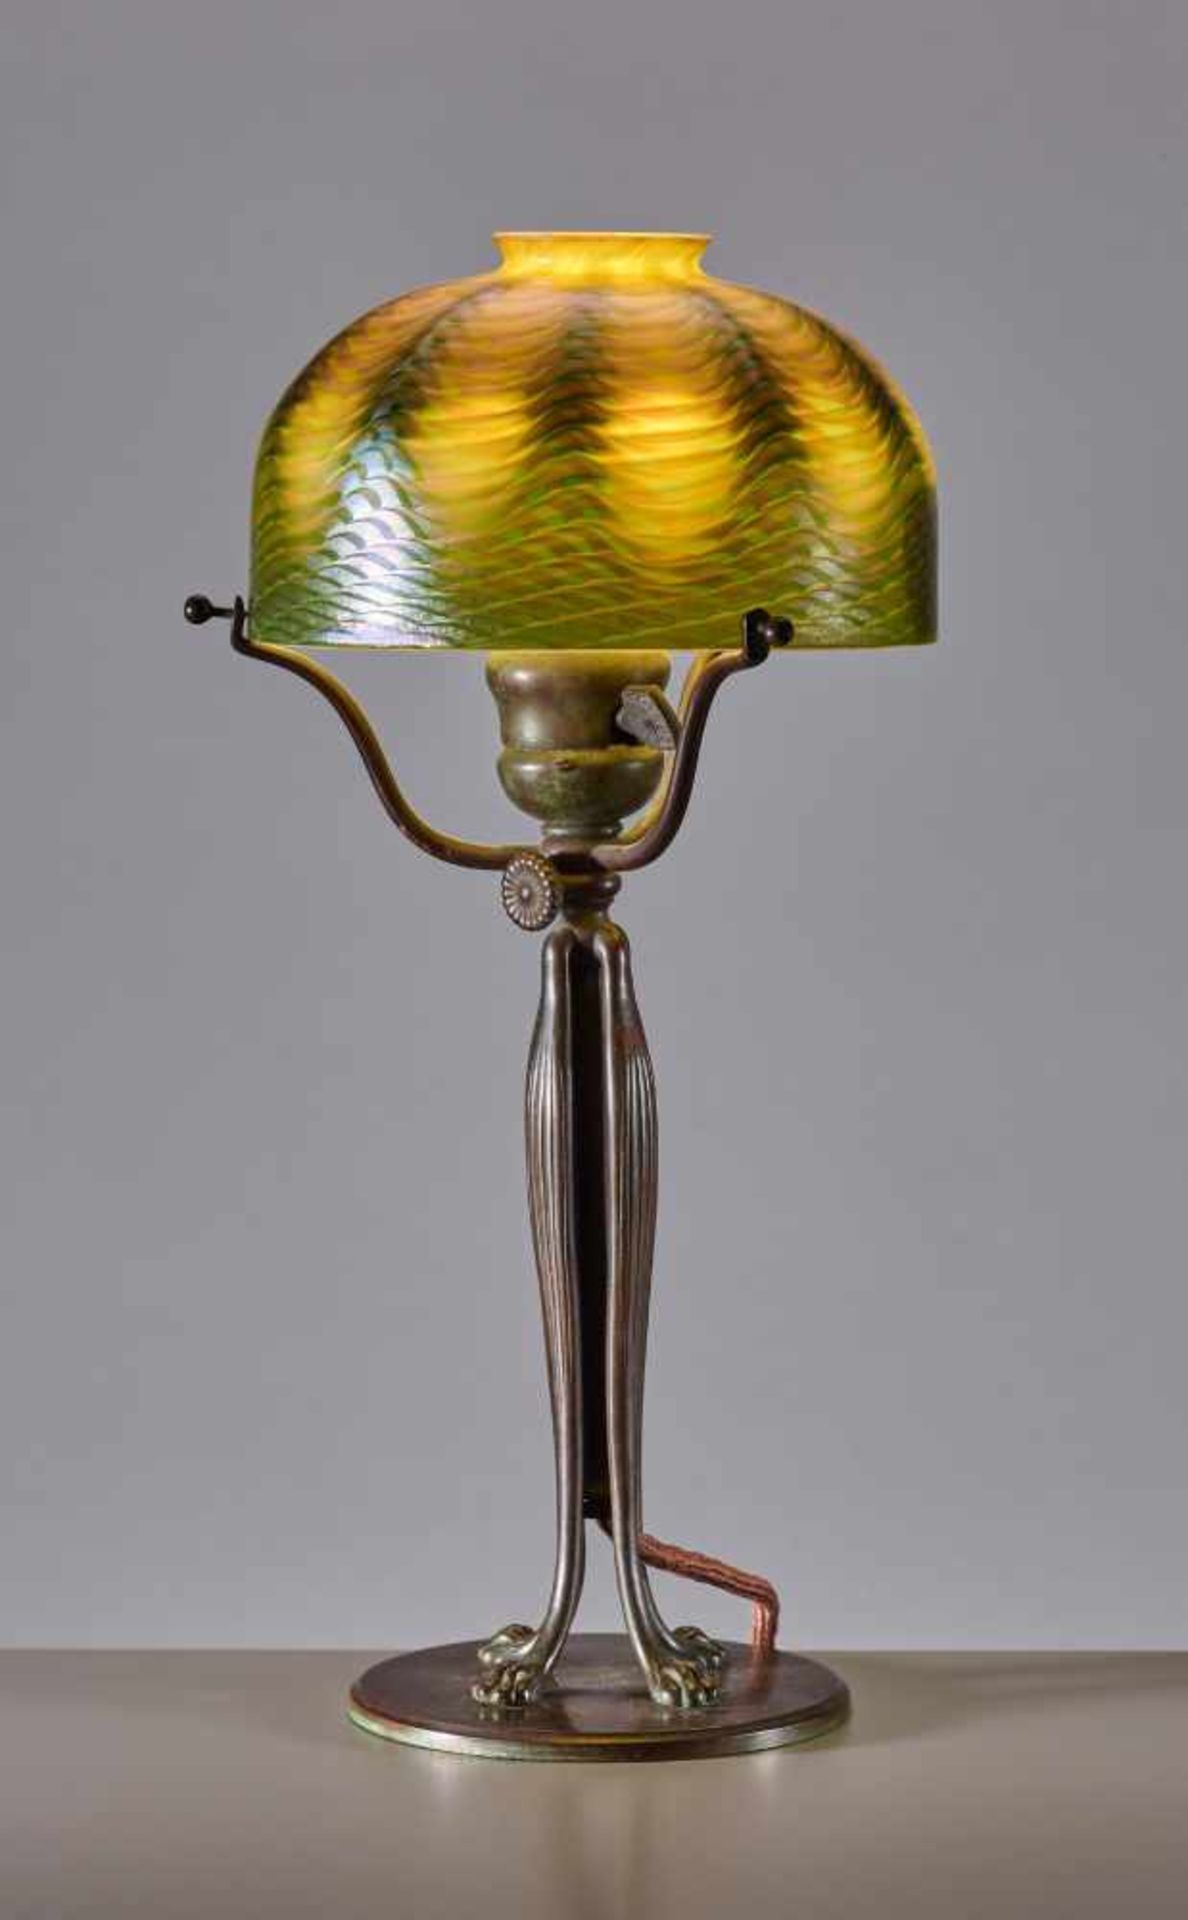 TIFFANY, FAVRILE TABLE LAMP, USA 1905Louis Comfort Tiffany (1848-1933) – American painter and